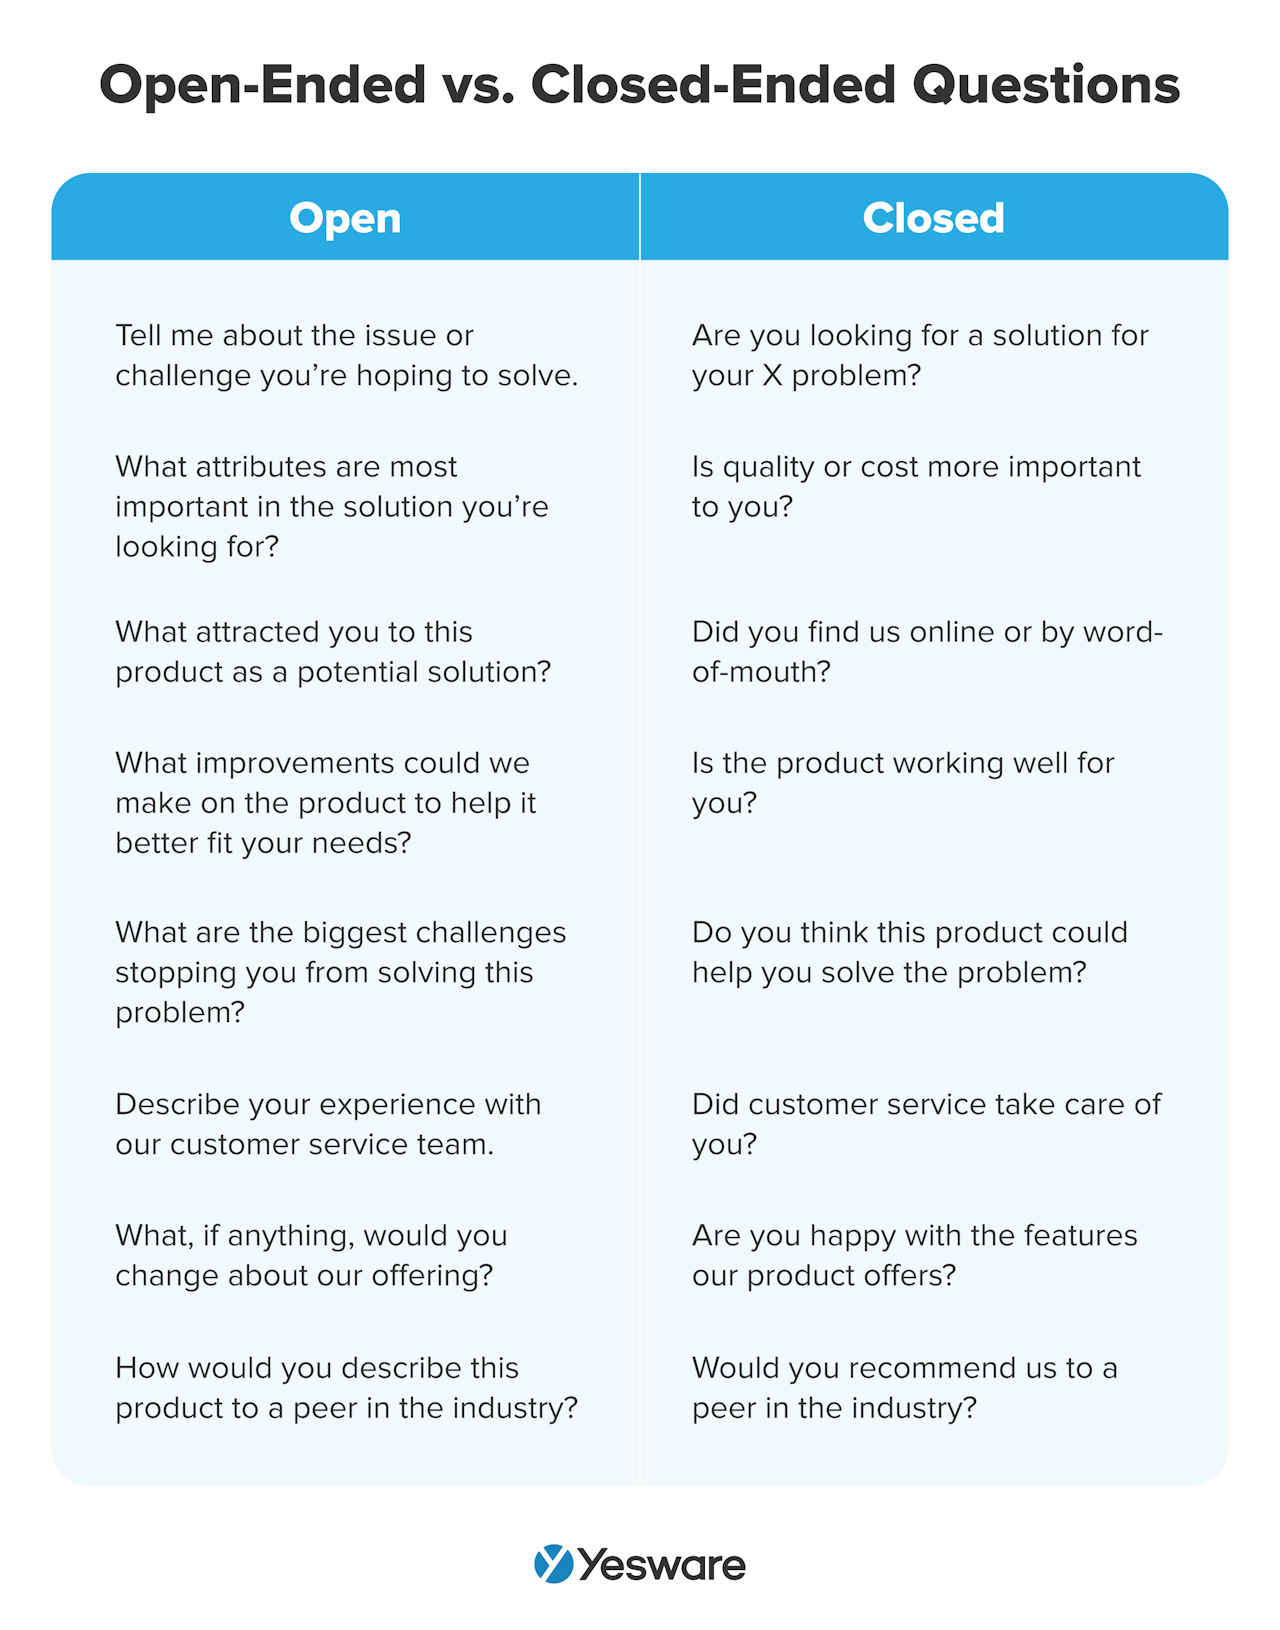 open-ended questions vs. closed-ended questions